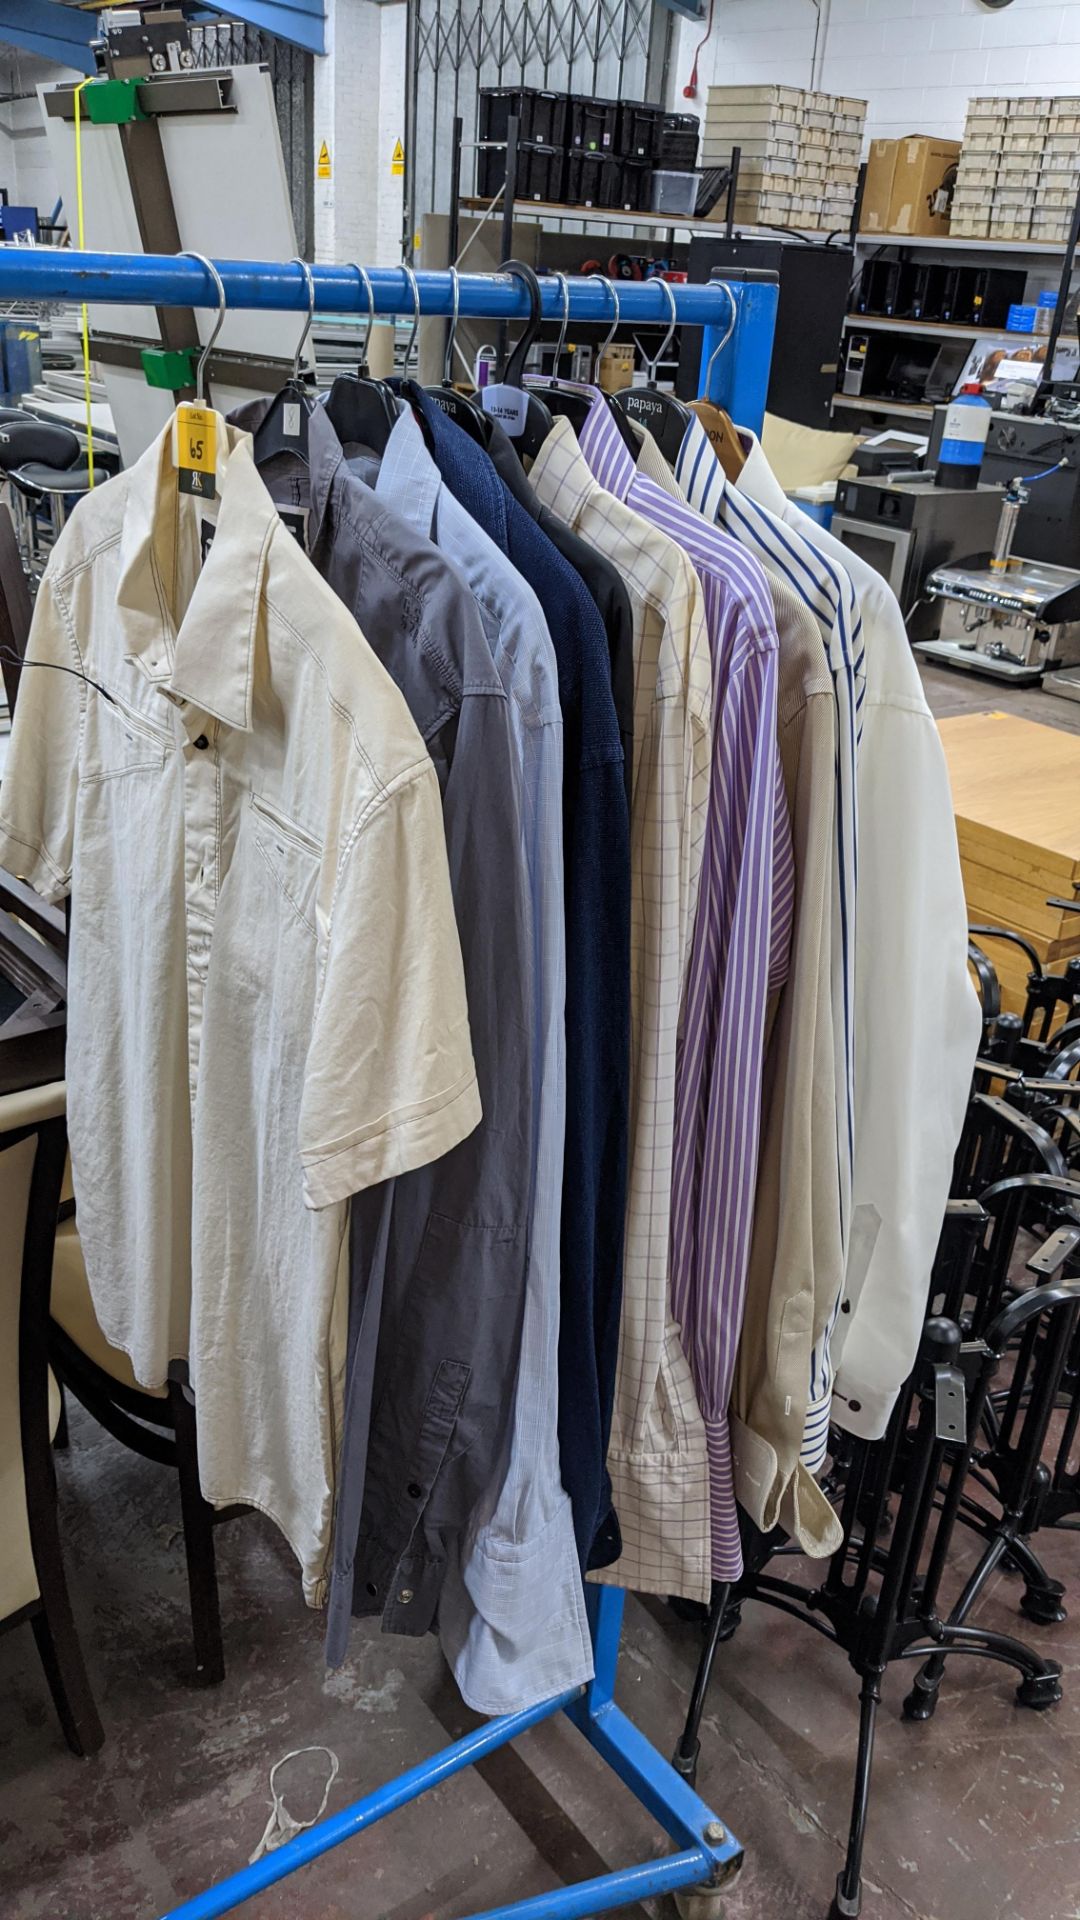 10 assorted men's shirts by G-Star Raw, Dunhill, Pink, Boggi, Eterna and Olymp, typically sizes